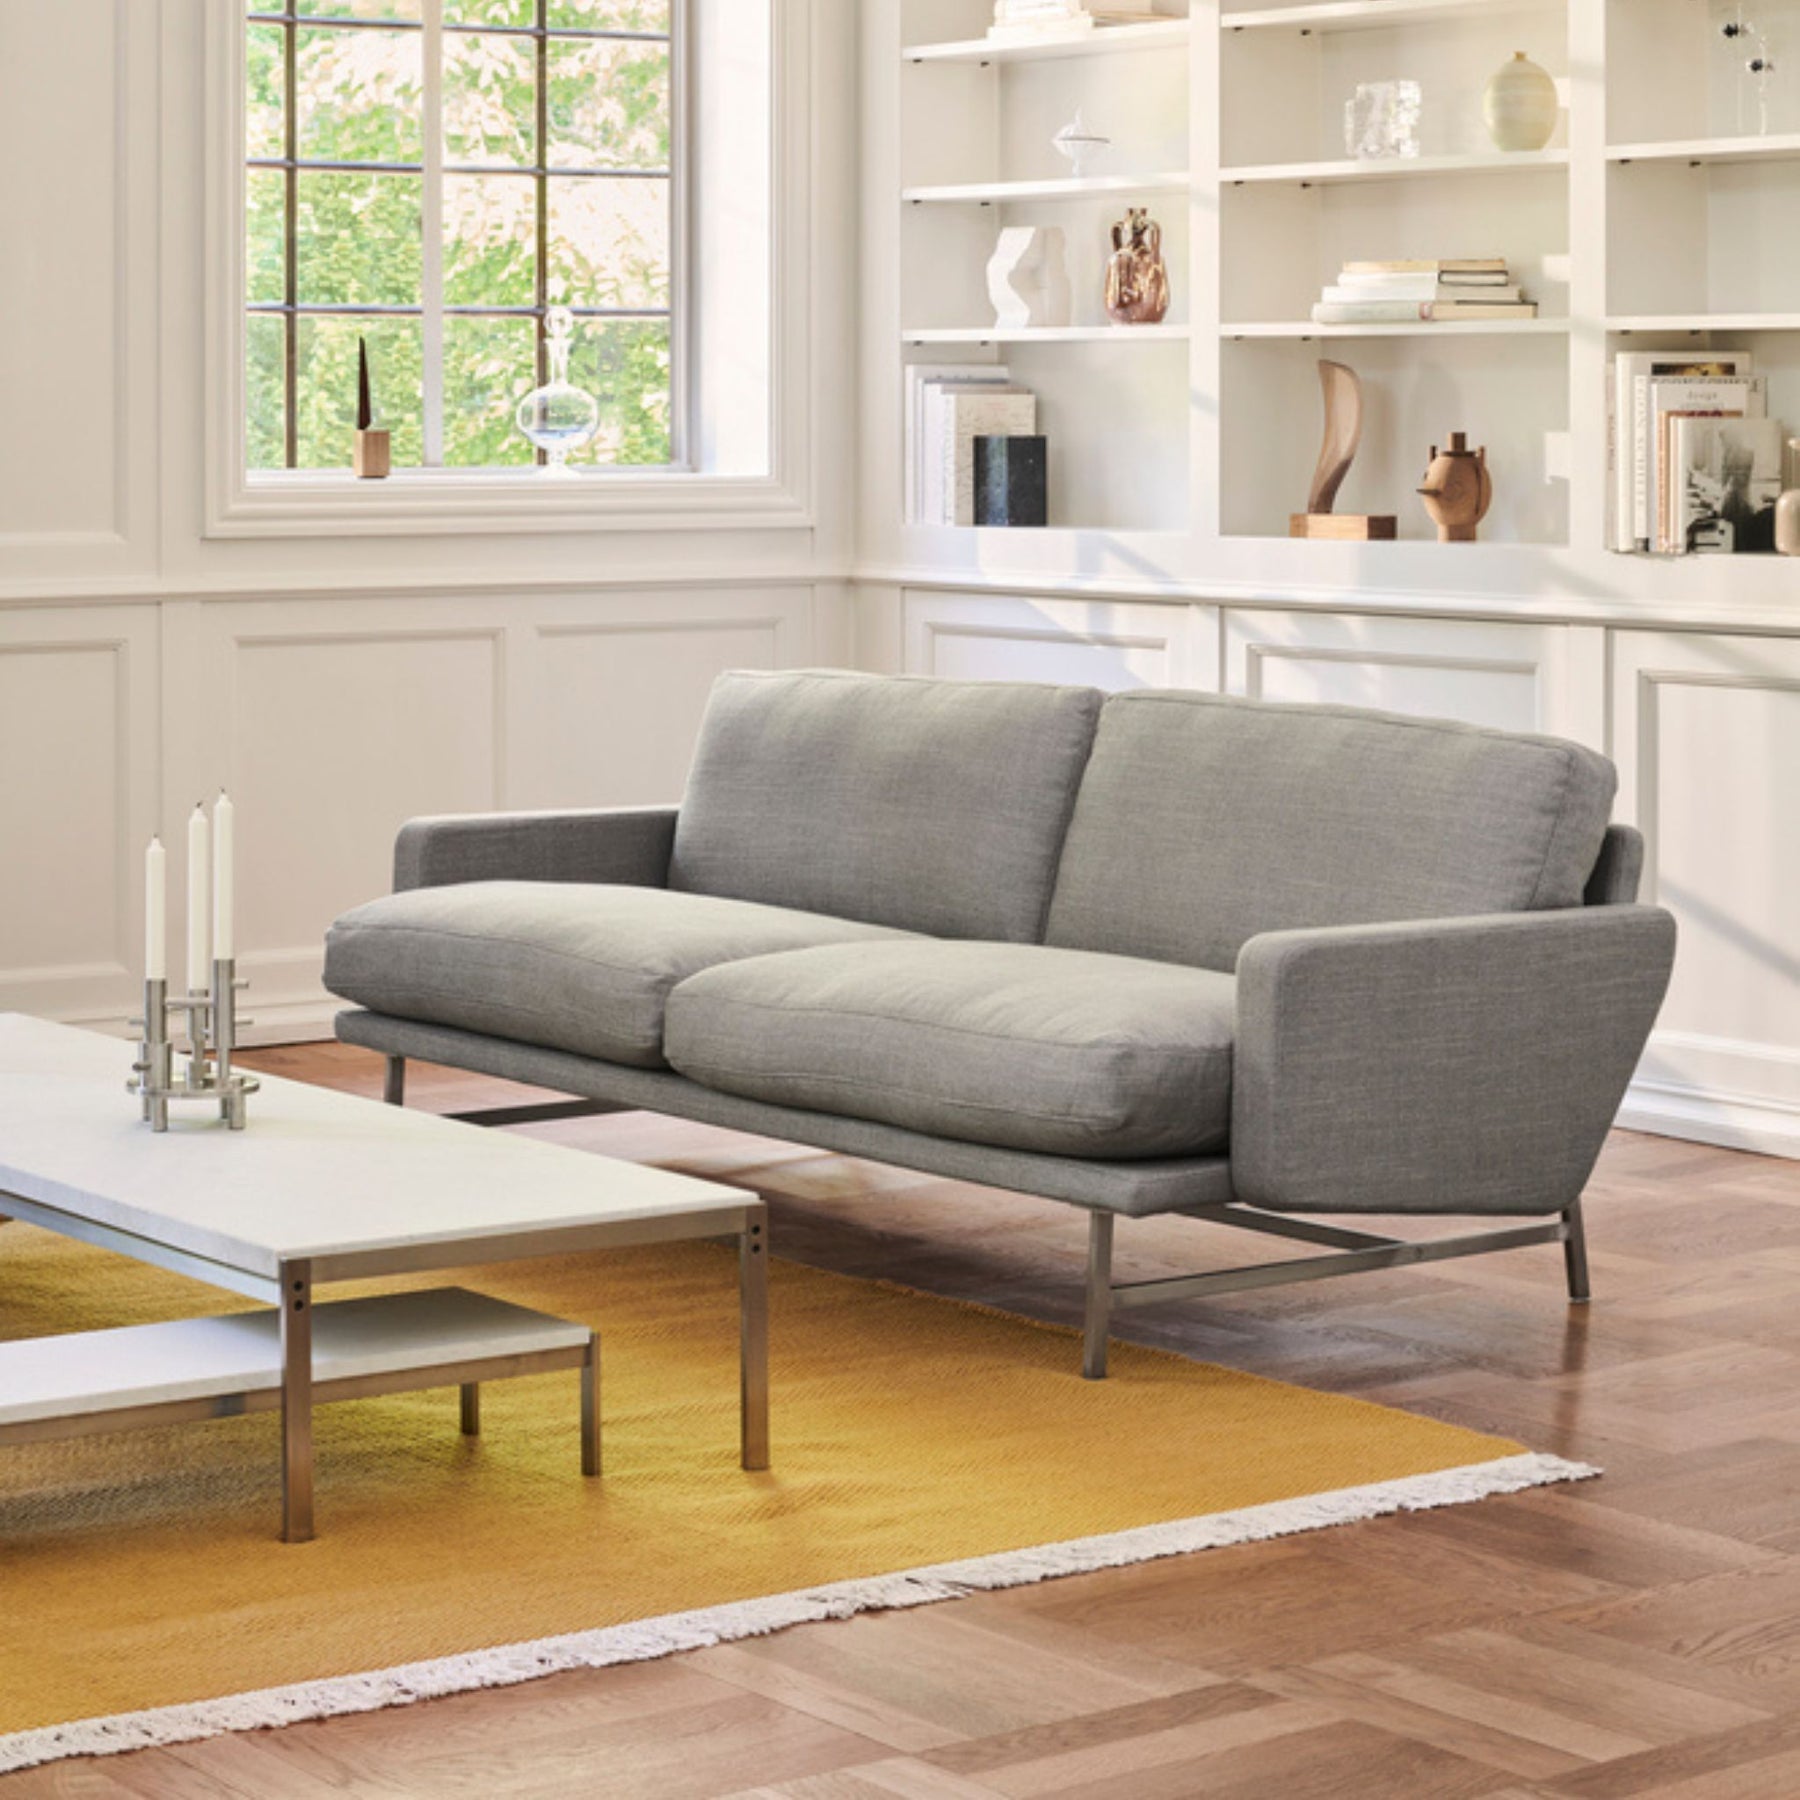 Fritz Hansen Lissoni Sofa in Living Room with Poul Kjaerholm Coffee Tables